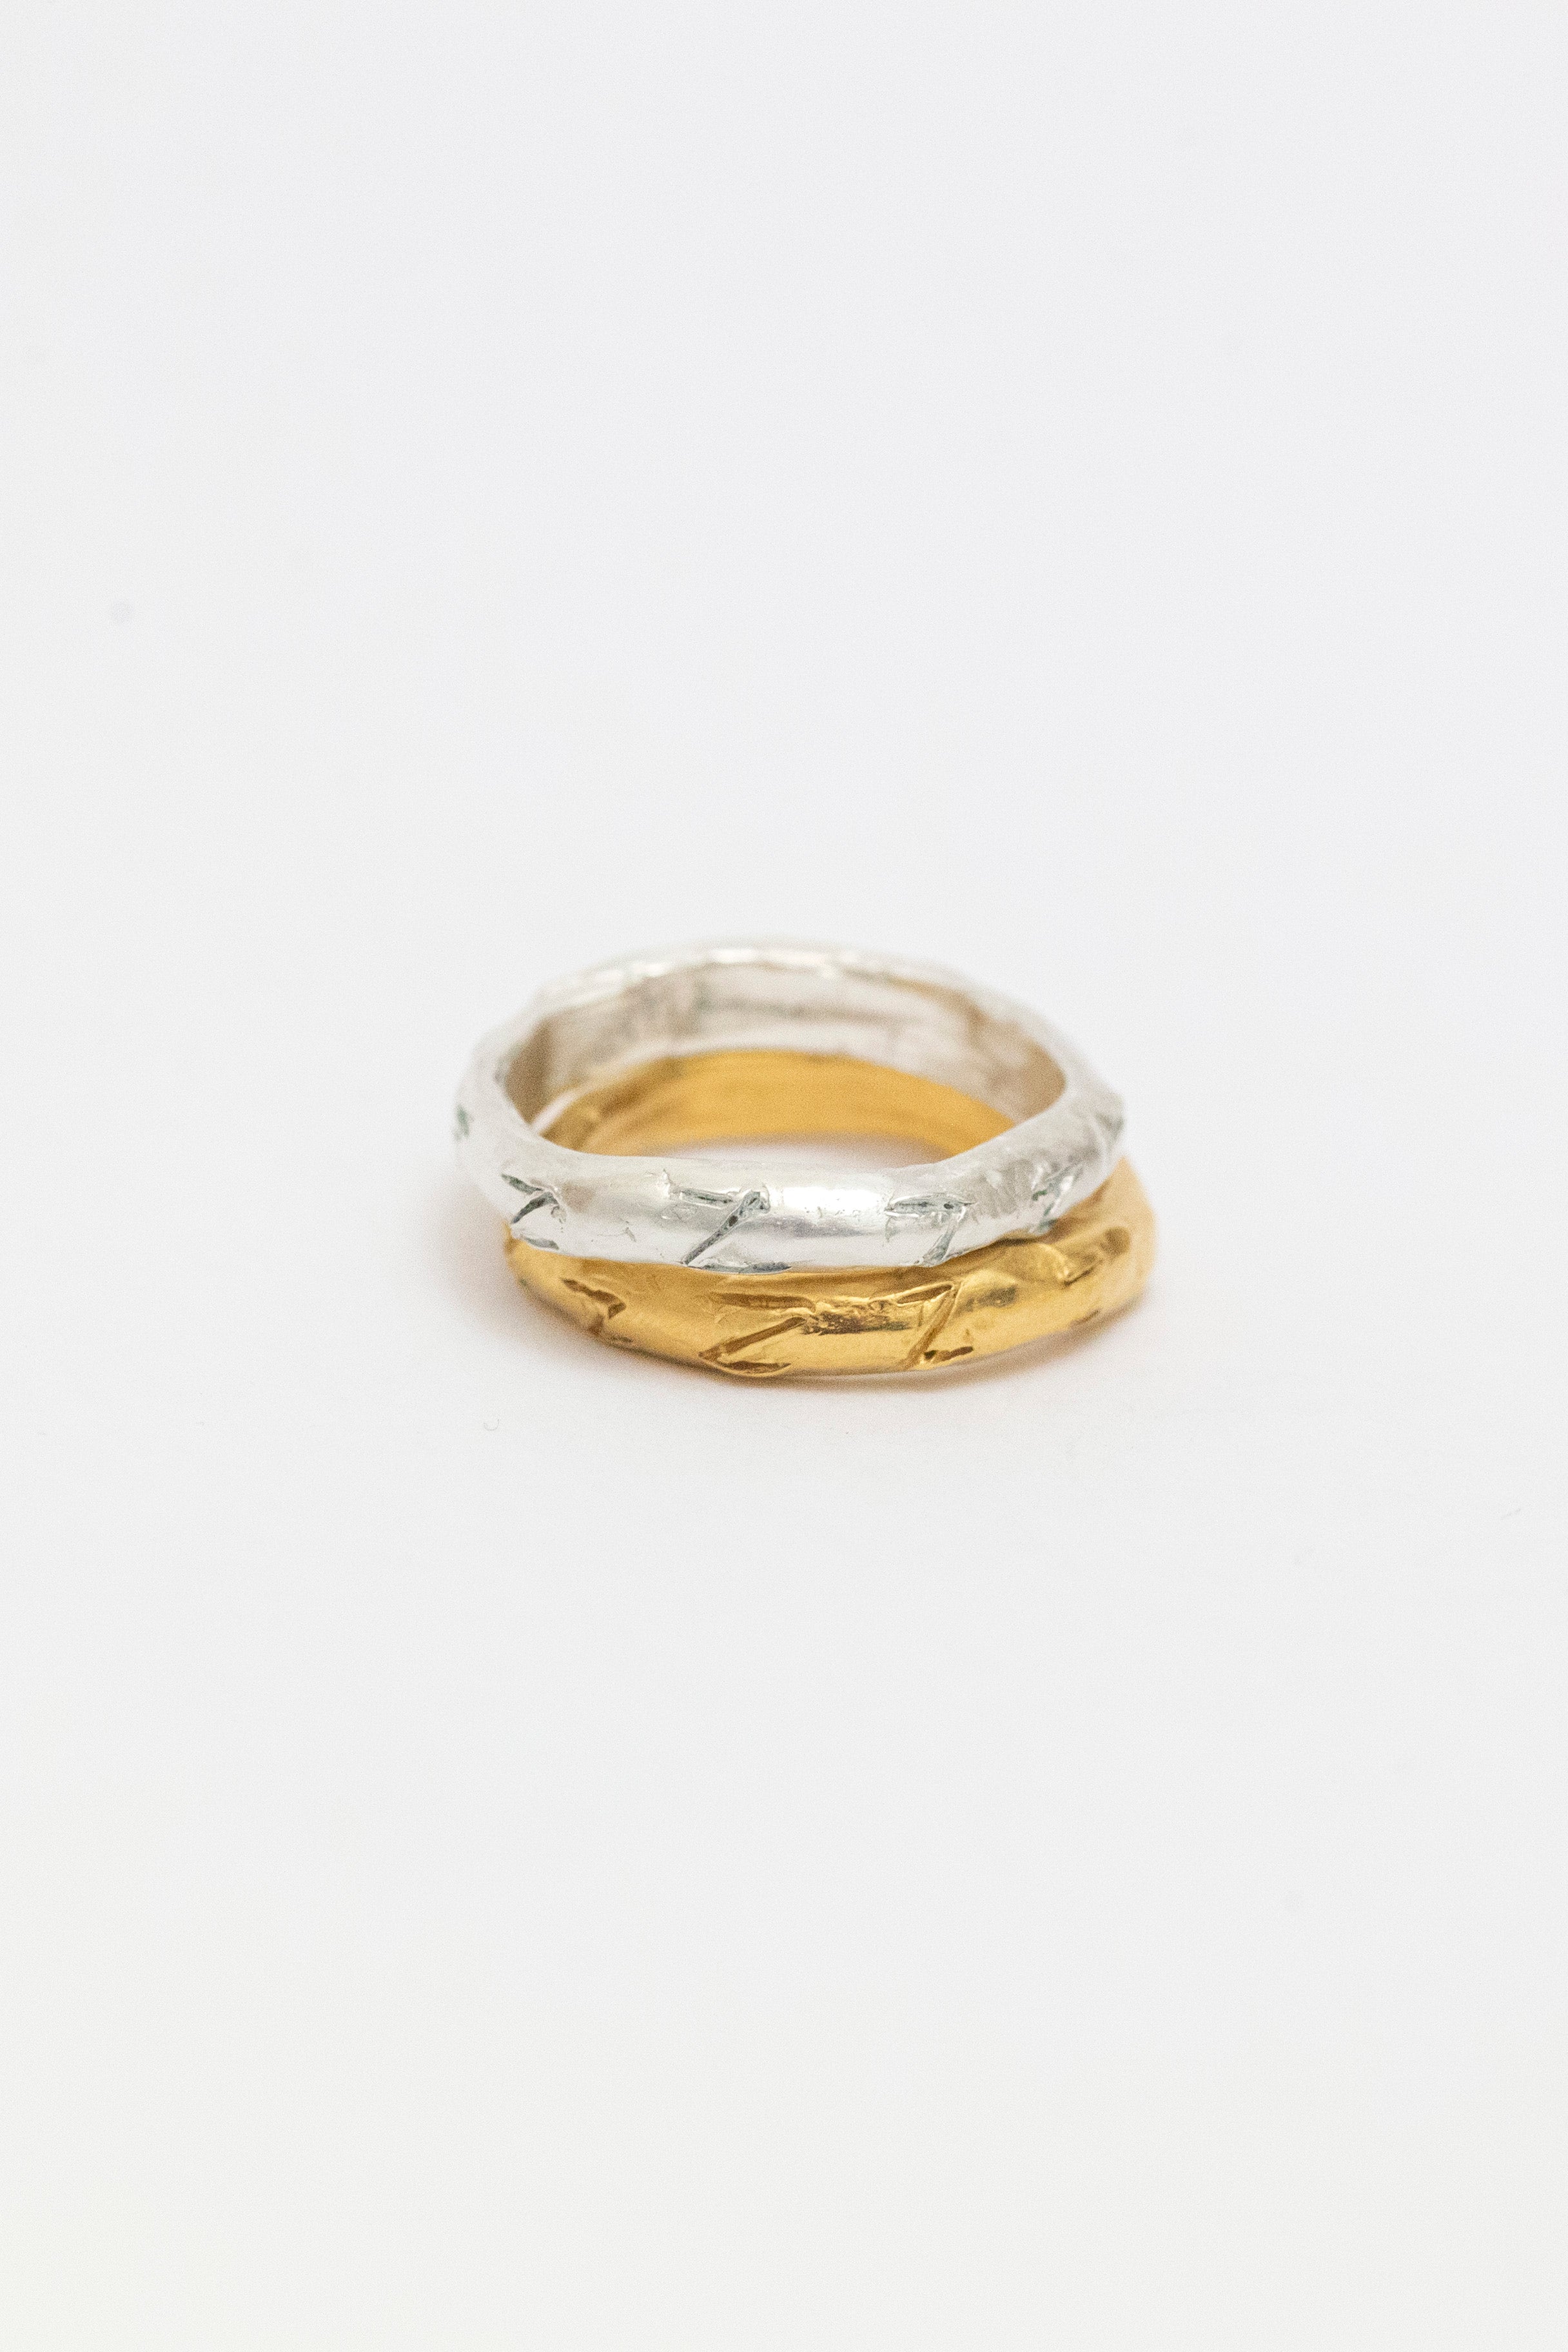 Good Sleep Ring (Z Z Z Z Z Z Z Z Z Z) in Gold - Lucy Clout